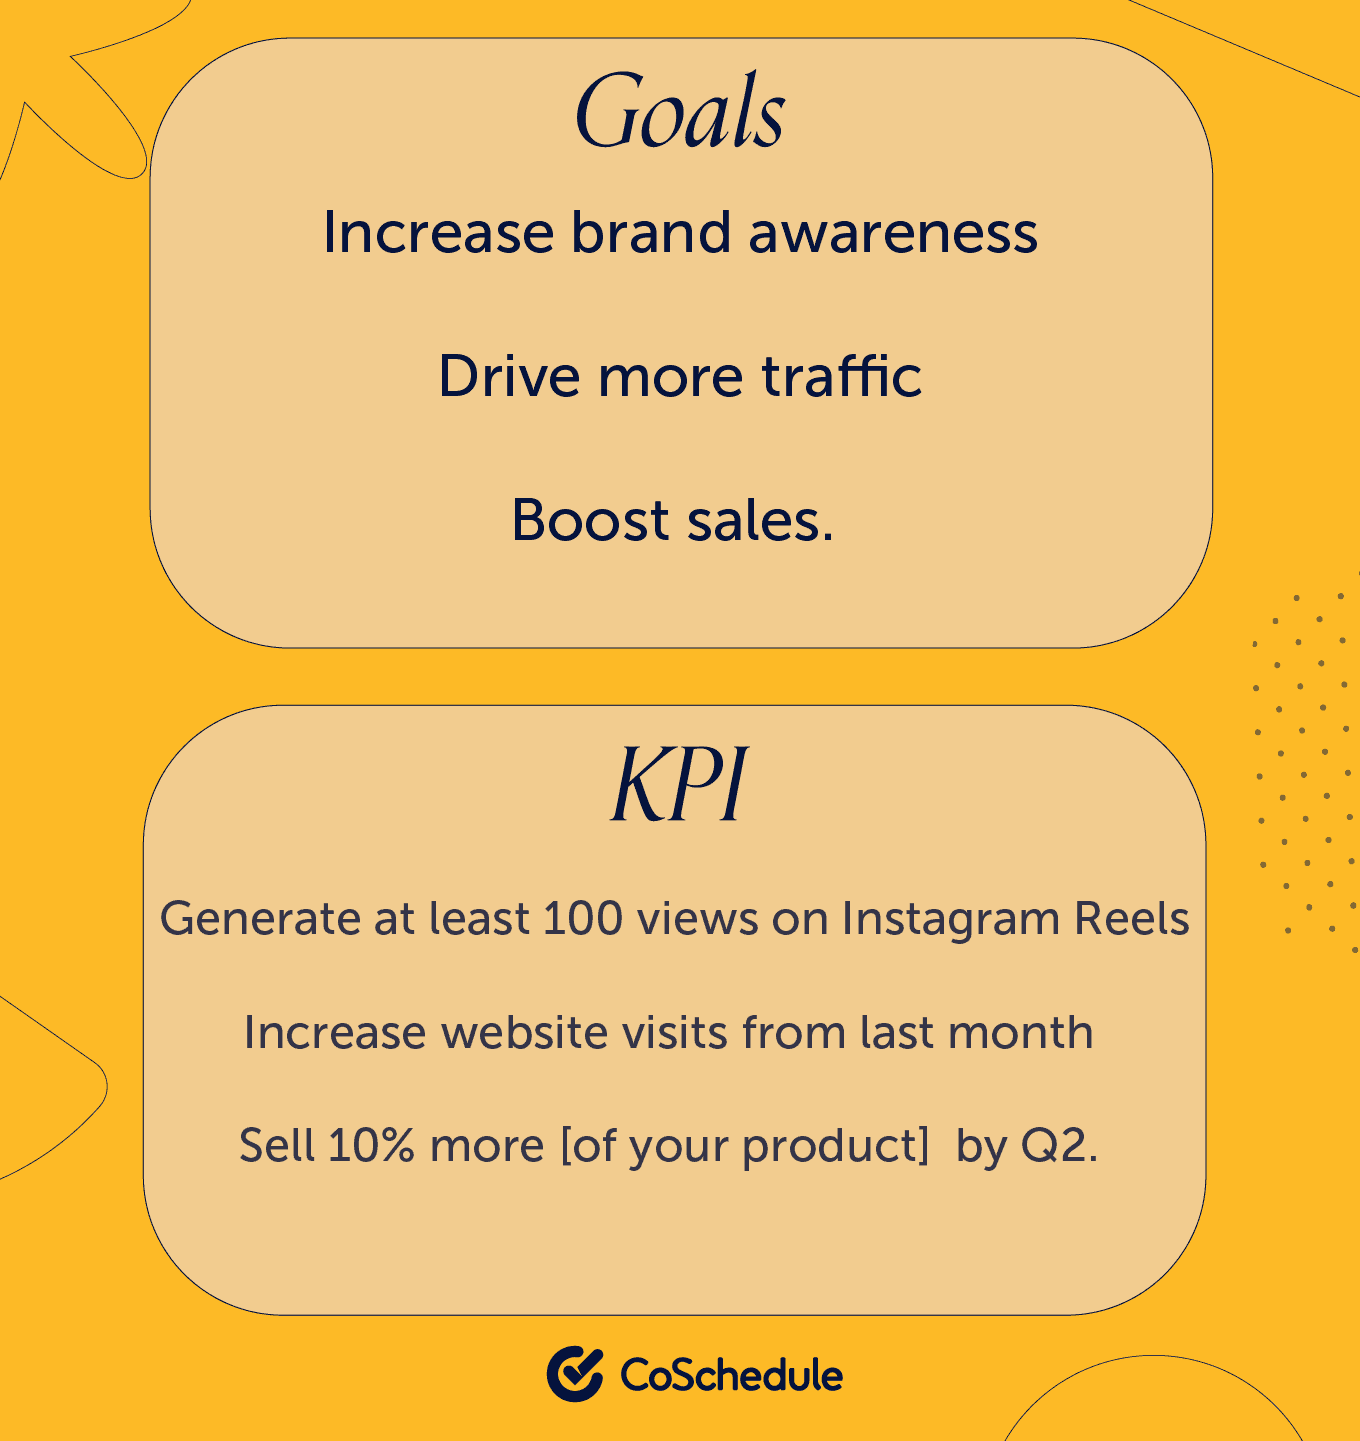 Coschedule influencer marketing goals and kpi'sgraphic